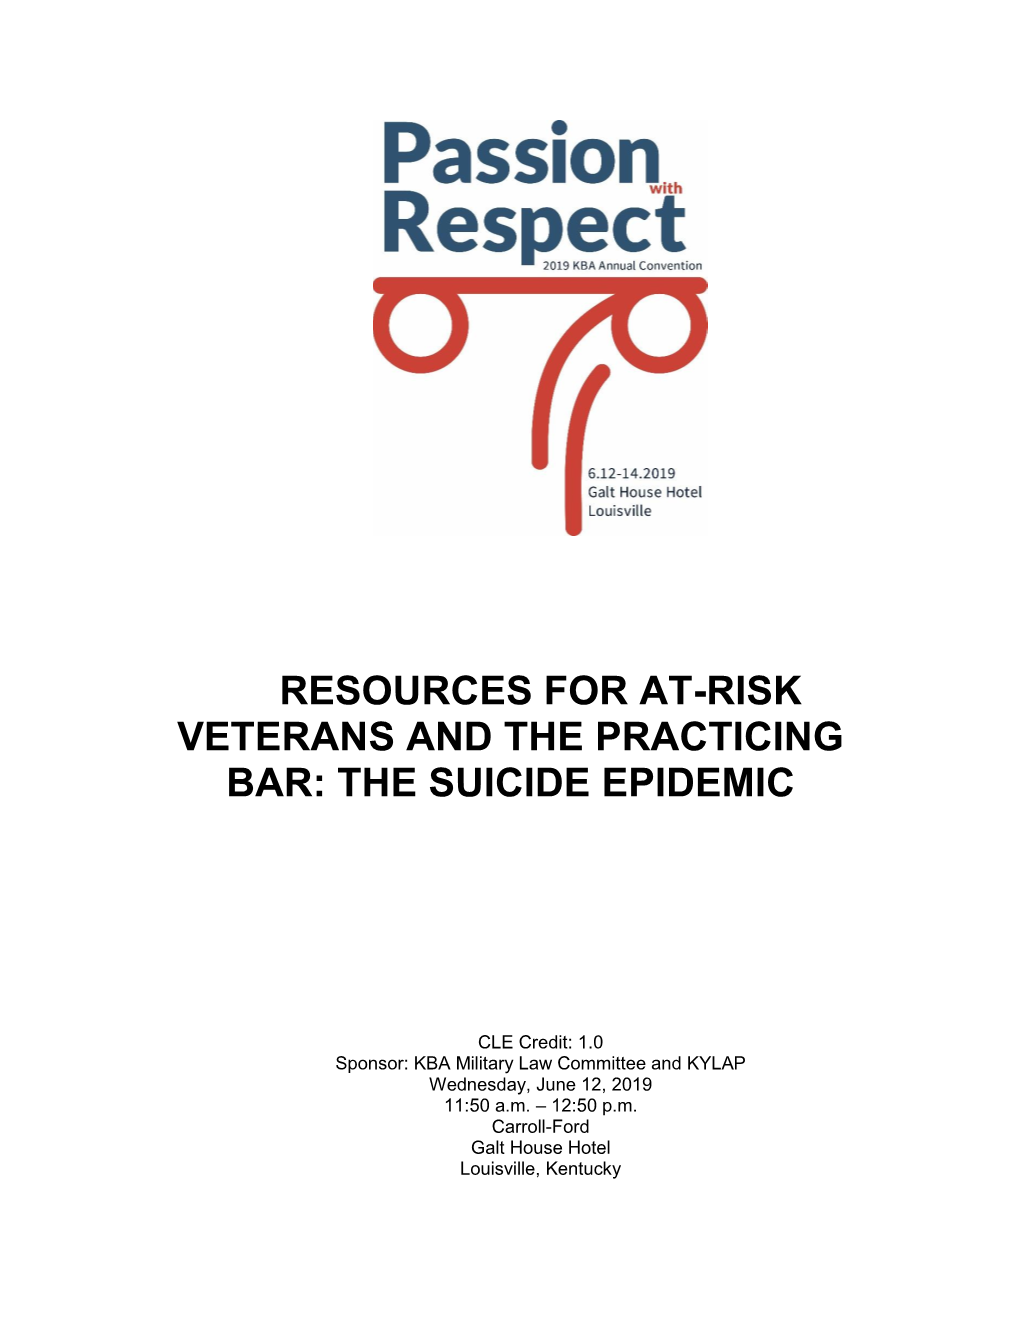 Resources for At-Risk Veterans and the Practicing Bar: the Suicide Epidemic